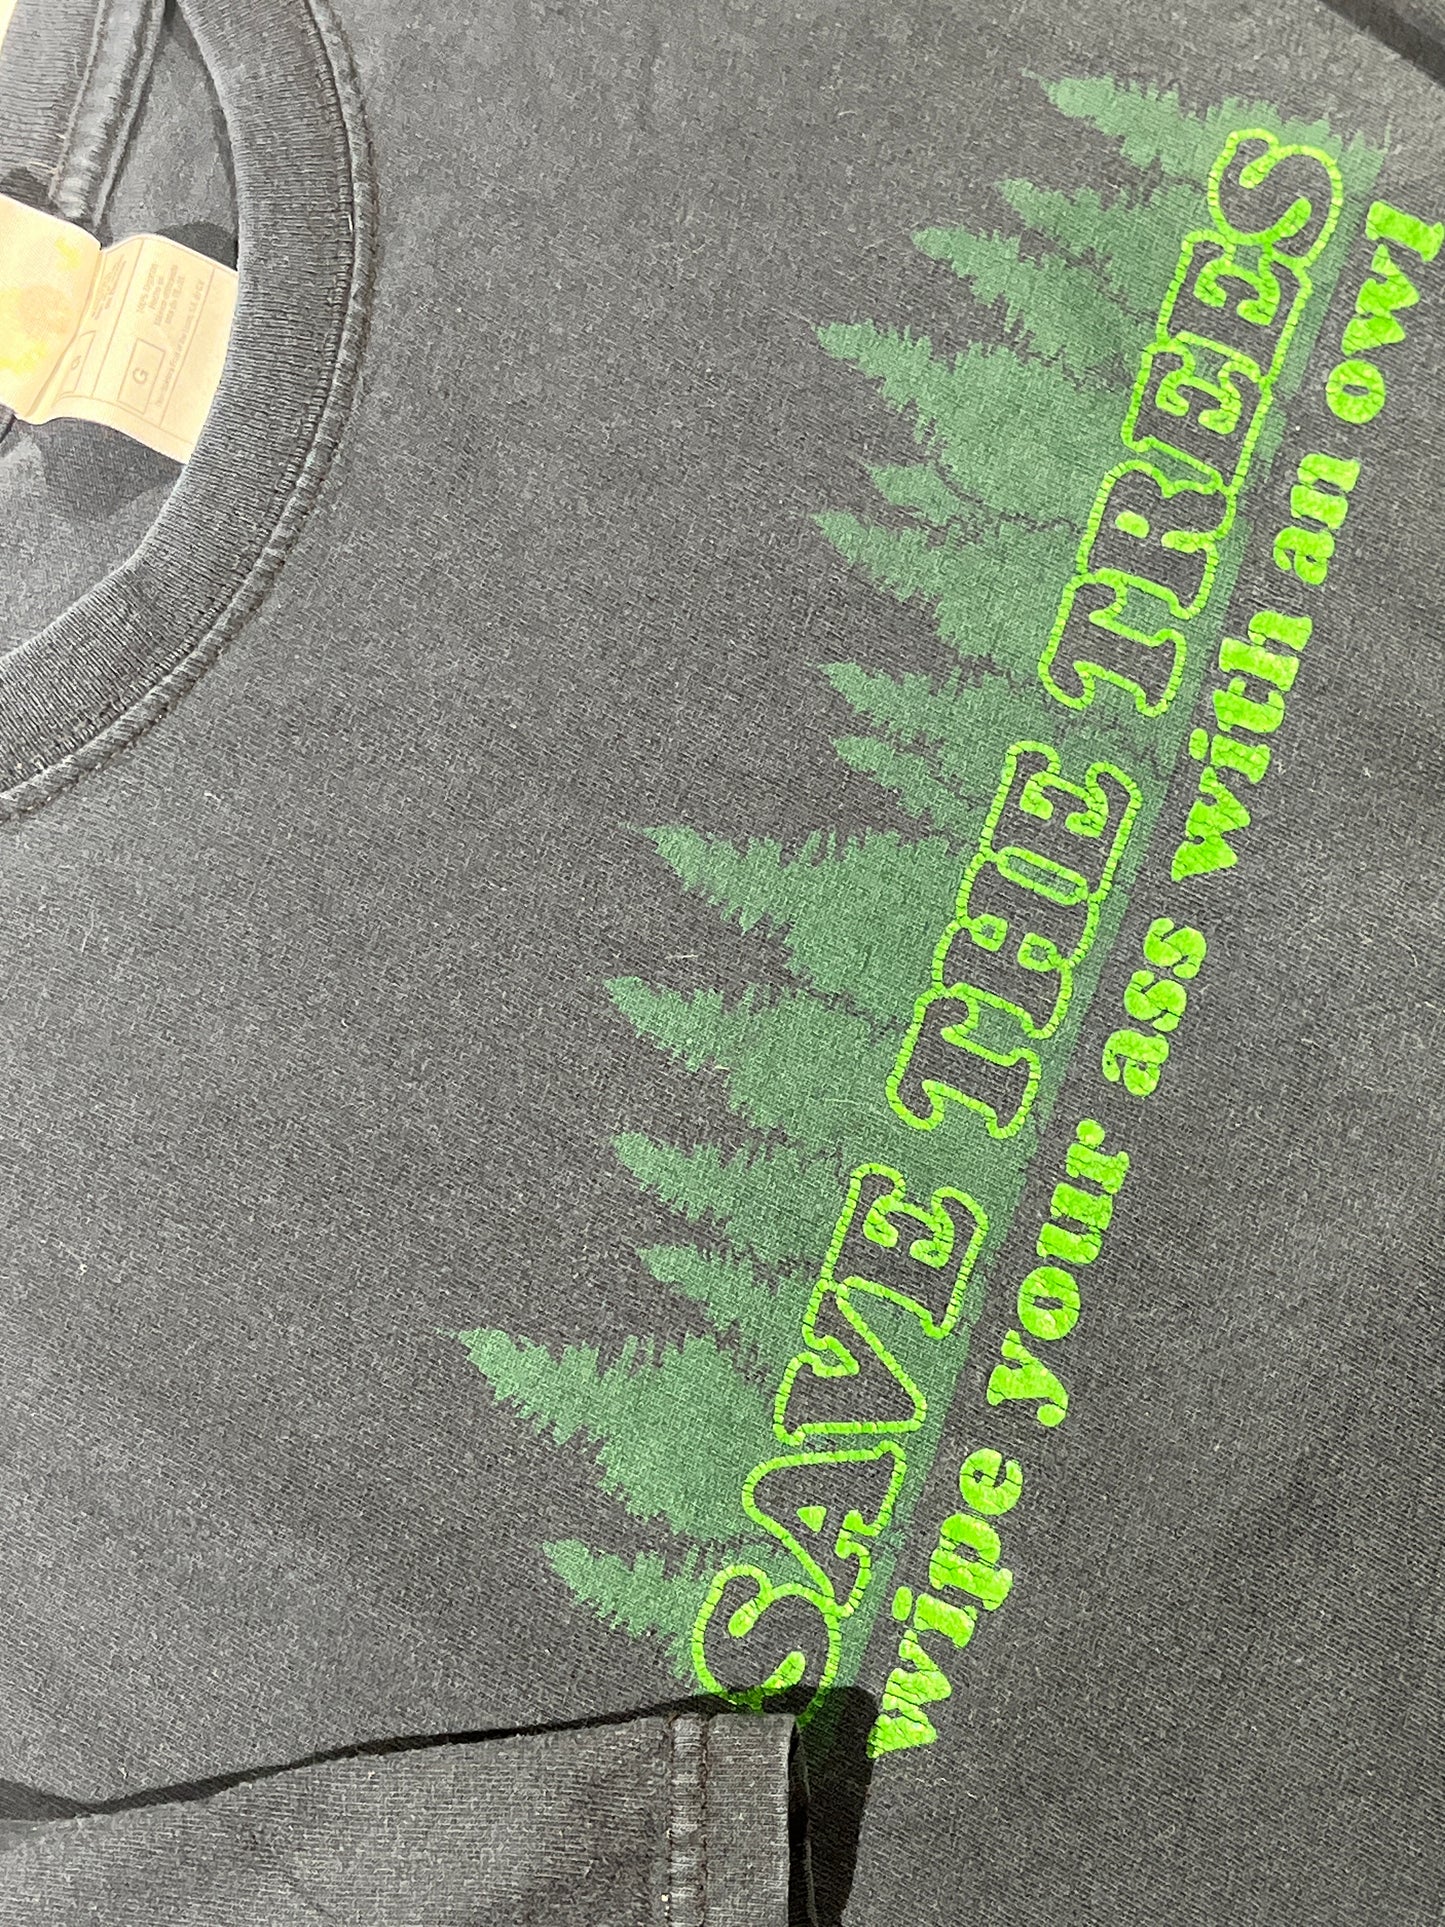 Vintage Save The Trees T-Shirt Wipe Your Ass